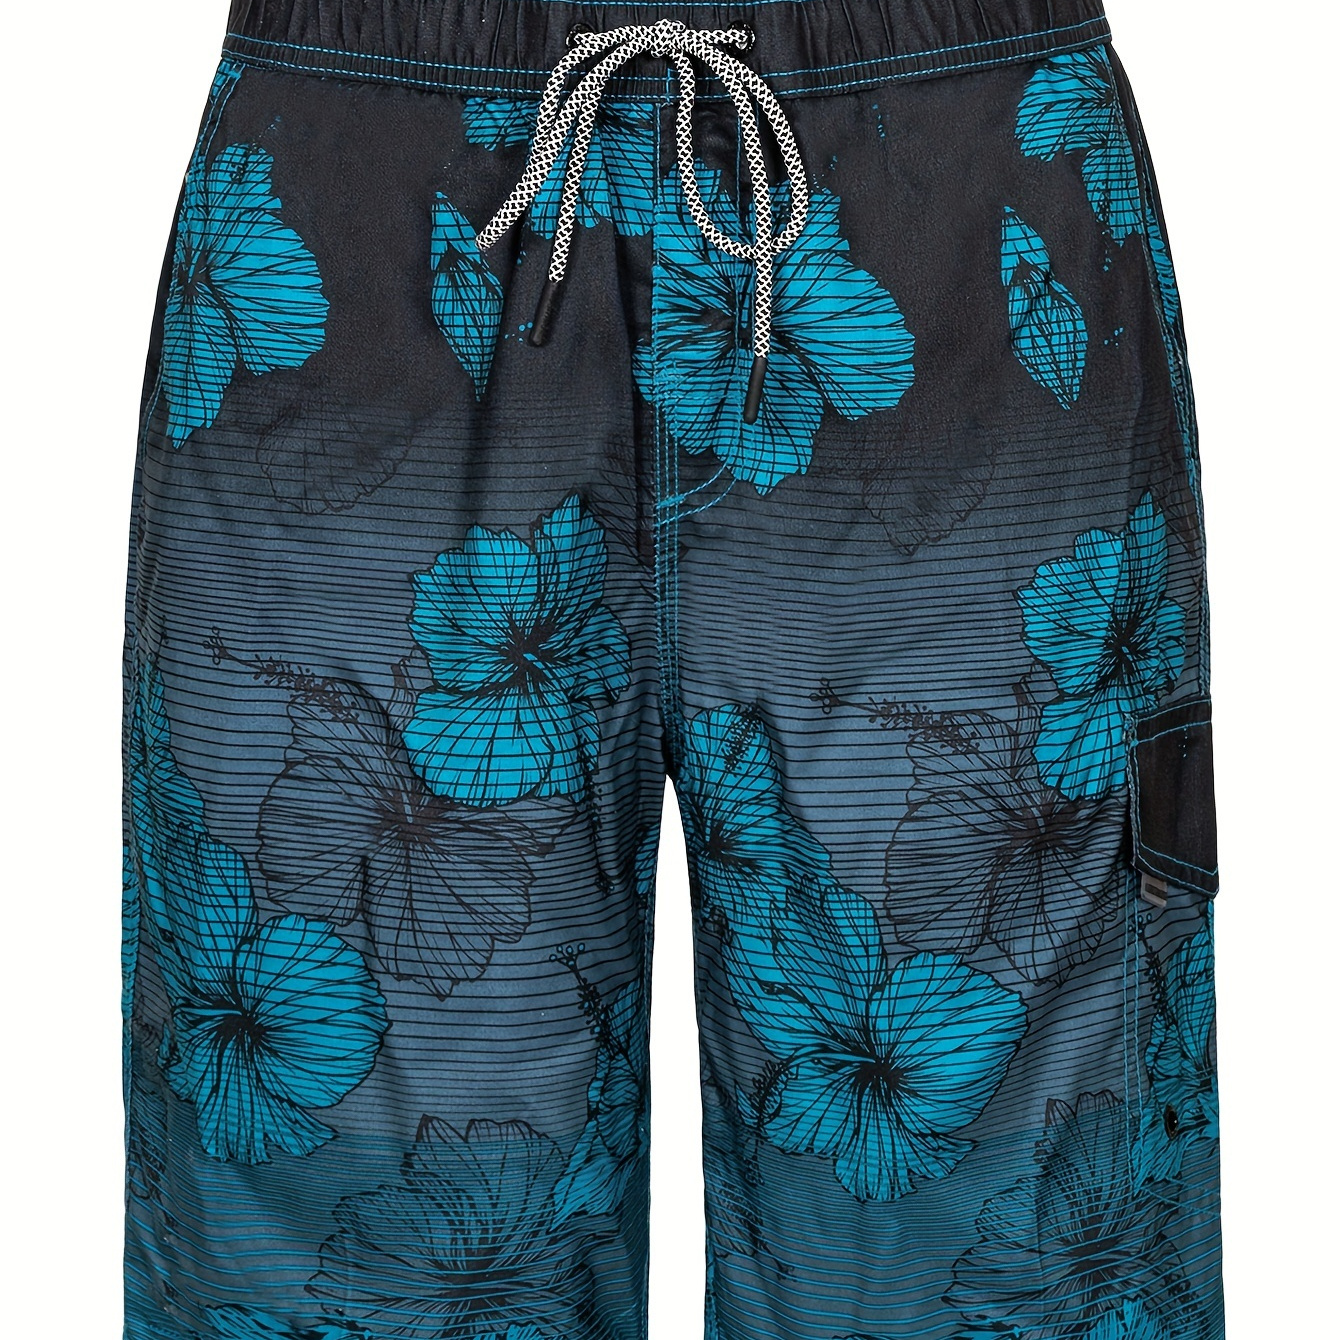 

Men's Summer Swim Trunks With Large Floral Print - Quick-dry, Adjustable Comfort, Perfect For Beach & Poolside Fun